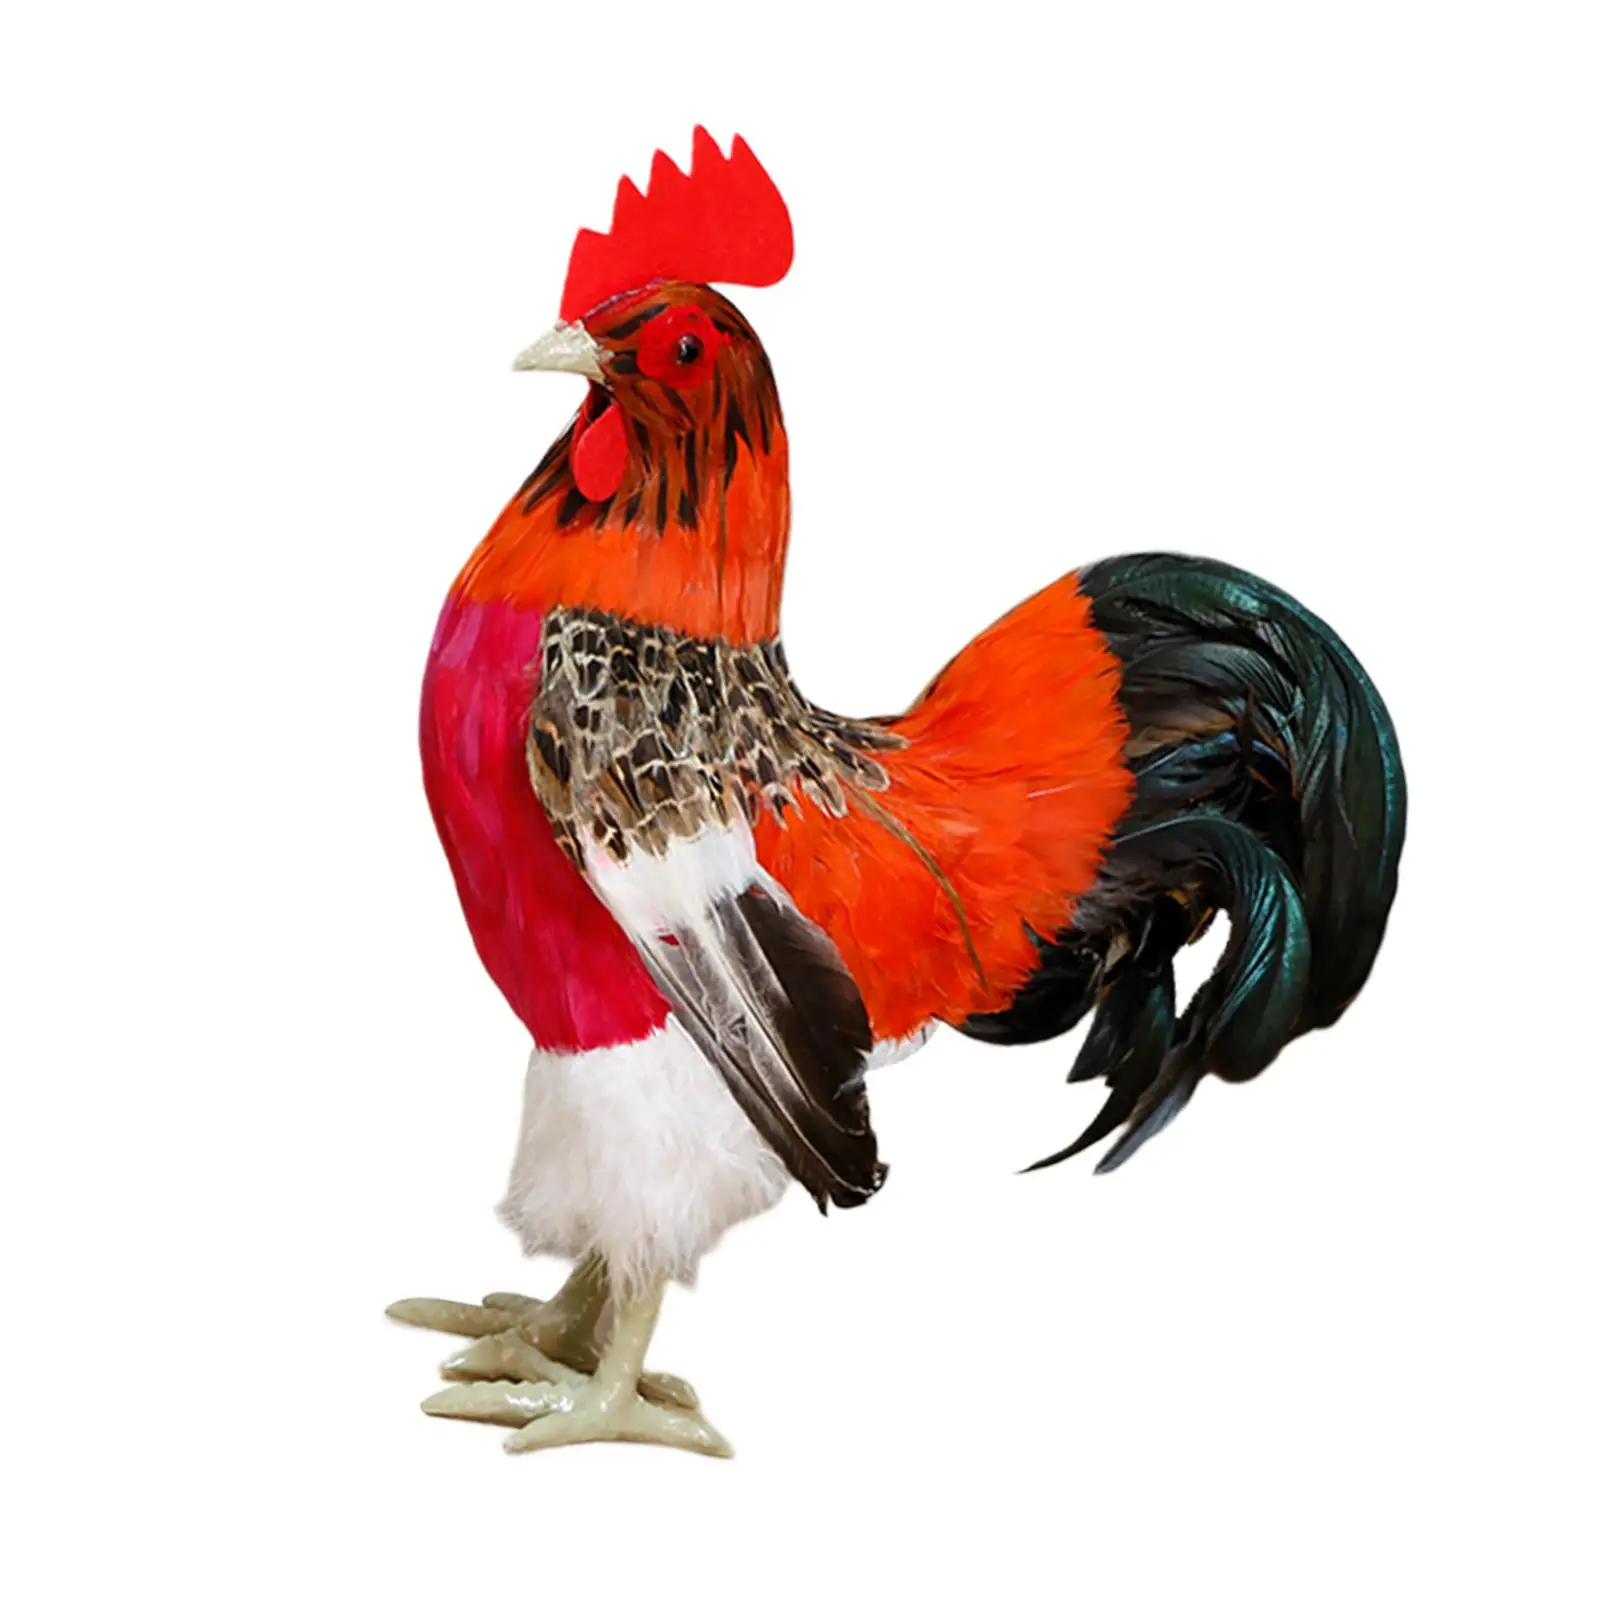 Simulation Rooster Statue Crafts Chicken Ornament Art Decoration for Outdoor Room Lawn Decoration